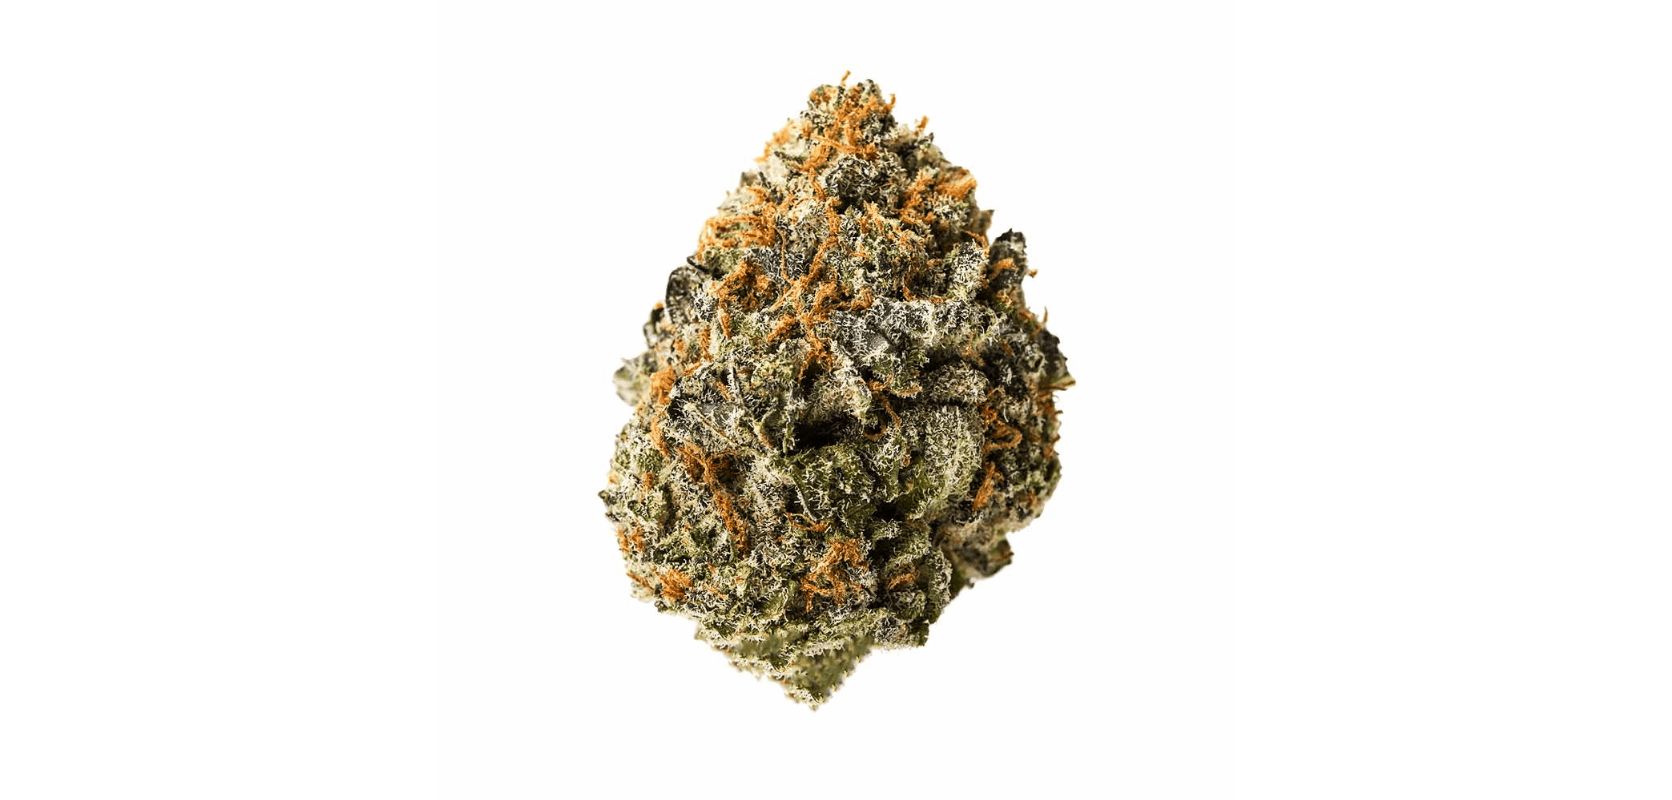 With THC levels ranging from 18 to 24 percent, this Sativa-dominant hybrid is one of the strongest buds out there. Just compare it to the ultra-powerful Grease Monkey strain, and you’ll know what we mean!